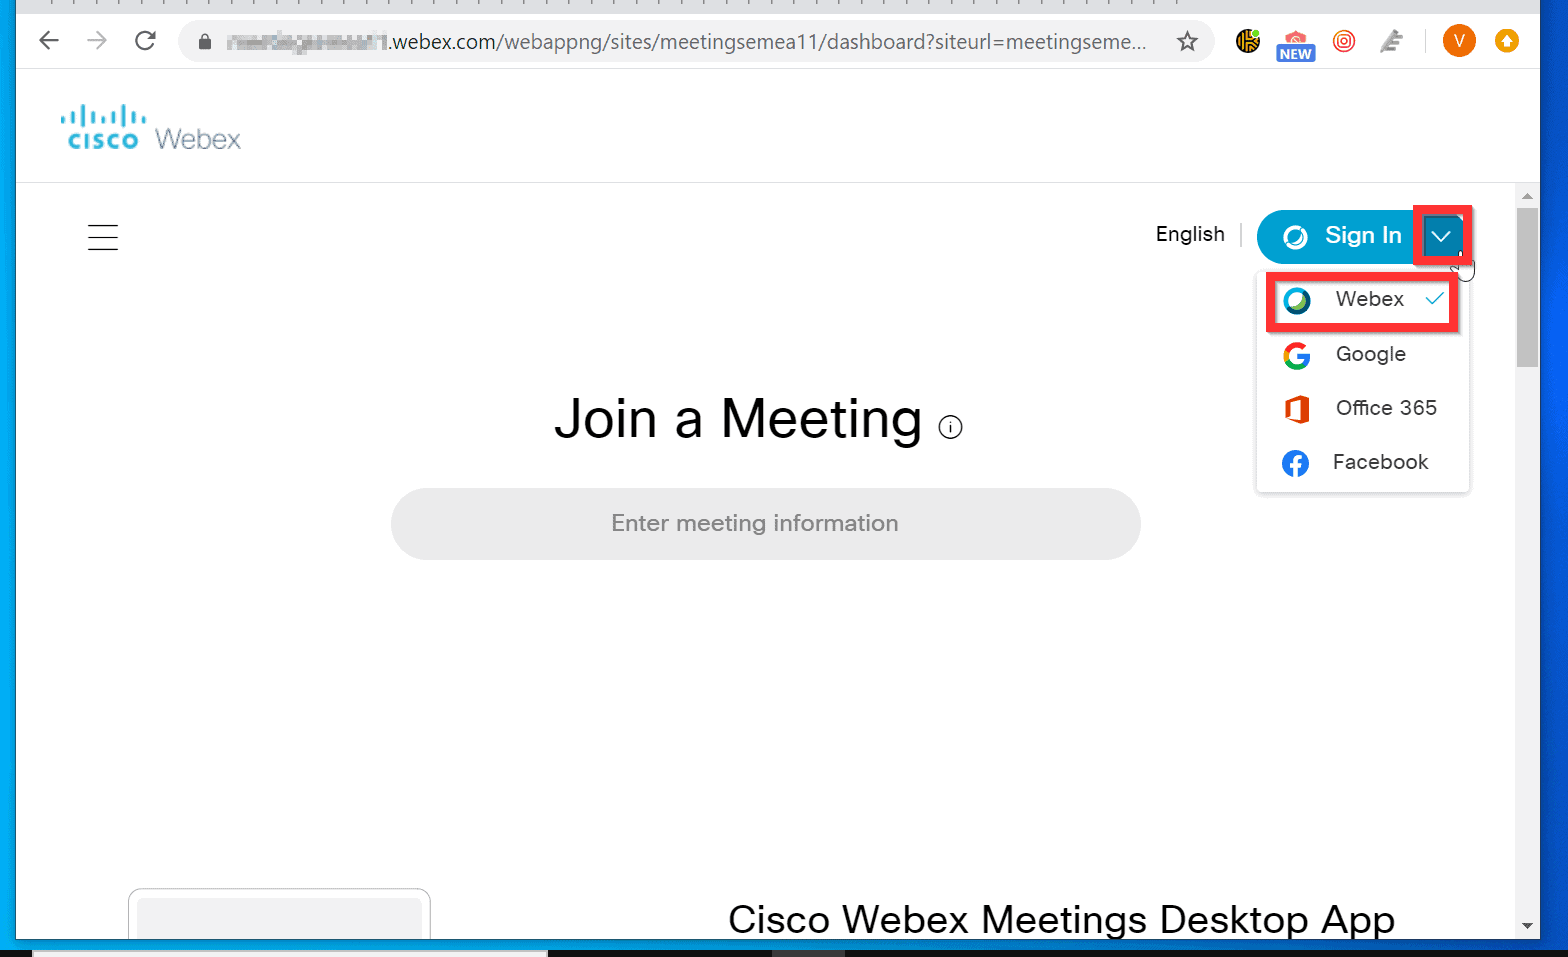 How to Use Webex to Schedule or Join a Meeting